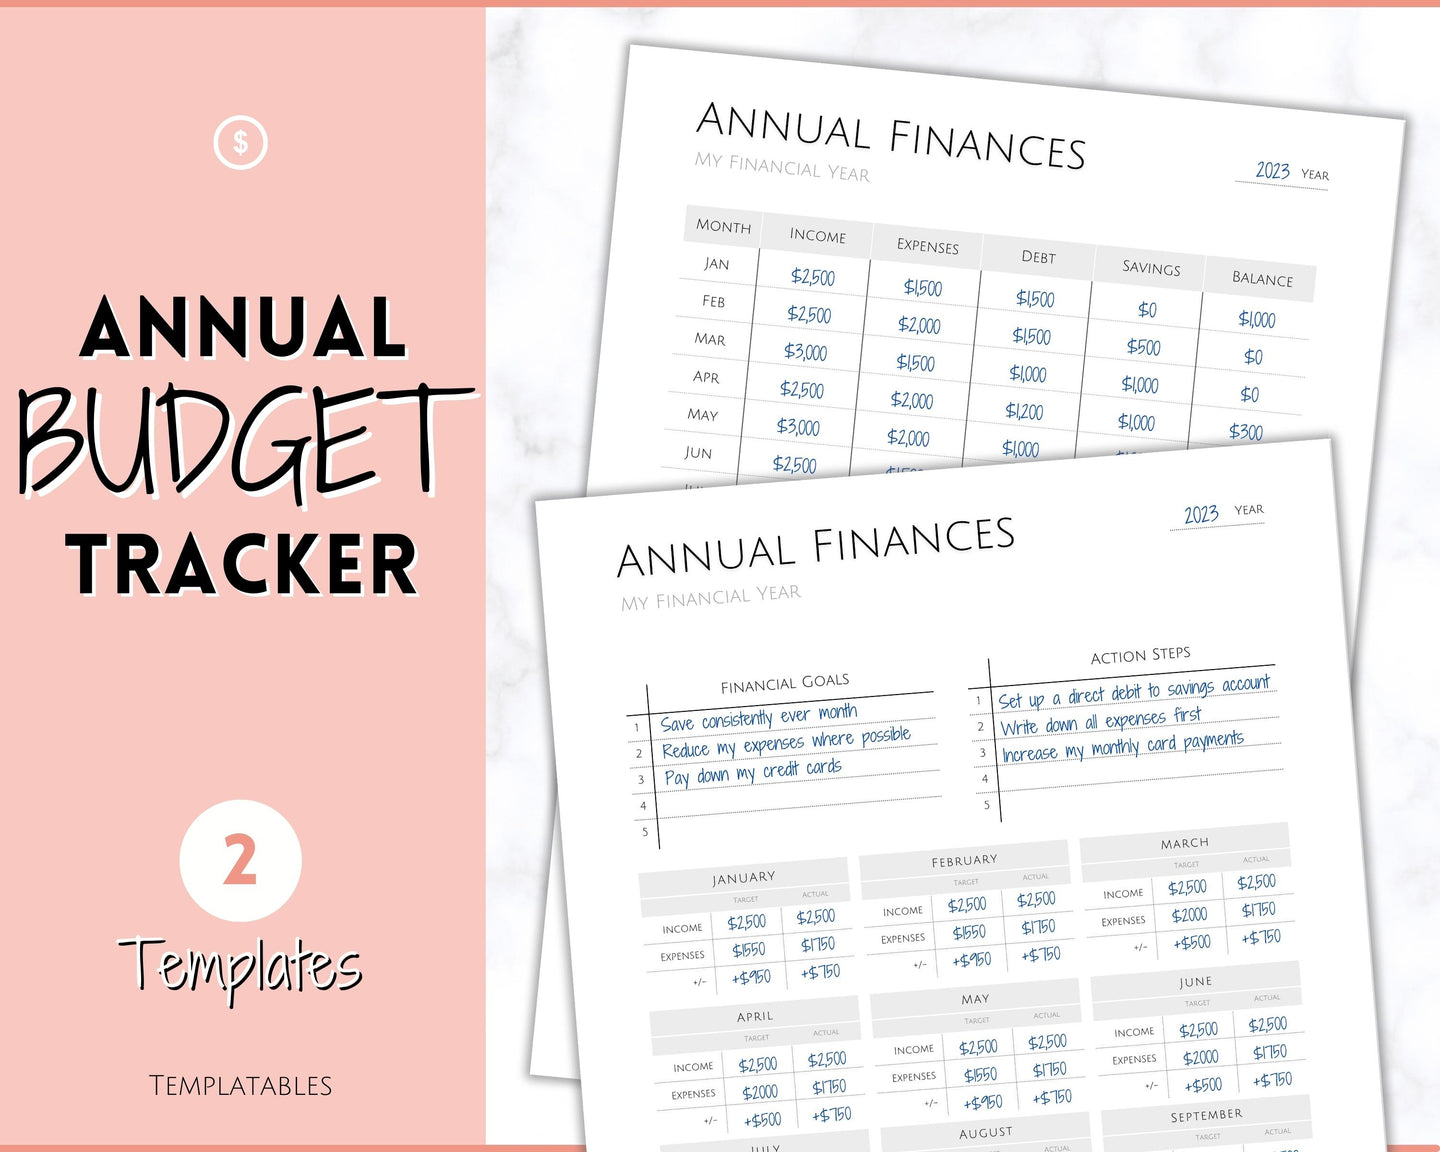 Annual Budget Tracker | Bill, Expenses, Income & Savings Tracker | Pink